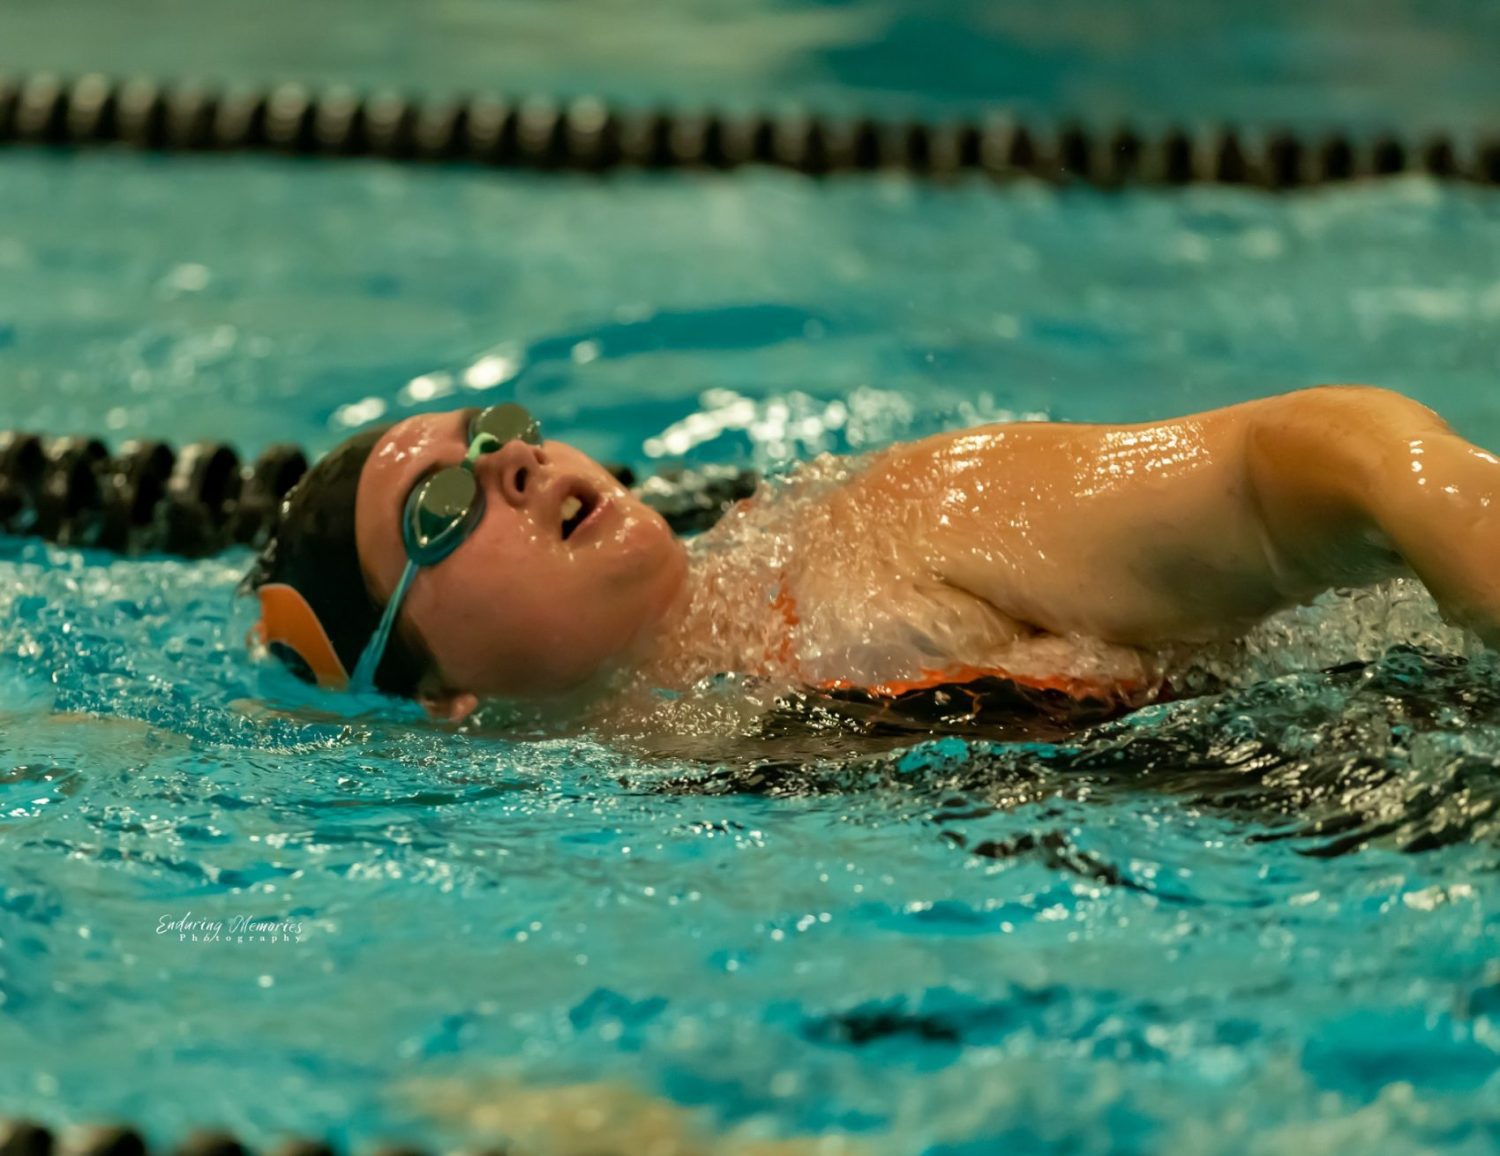 Mona Shores places second in swimming meet, host Ludington finishes third